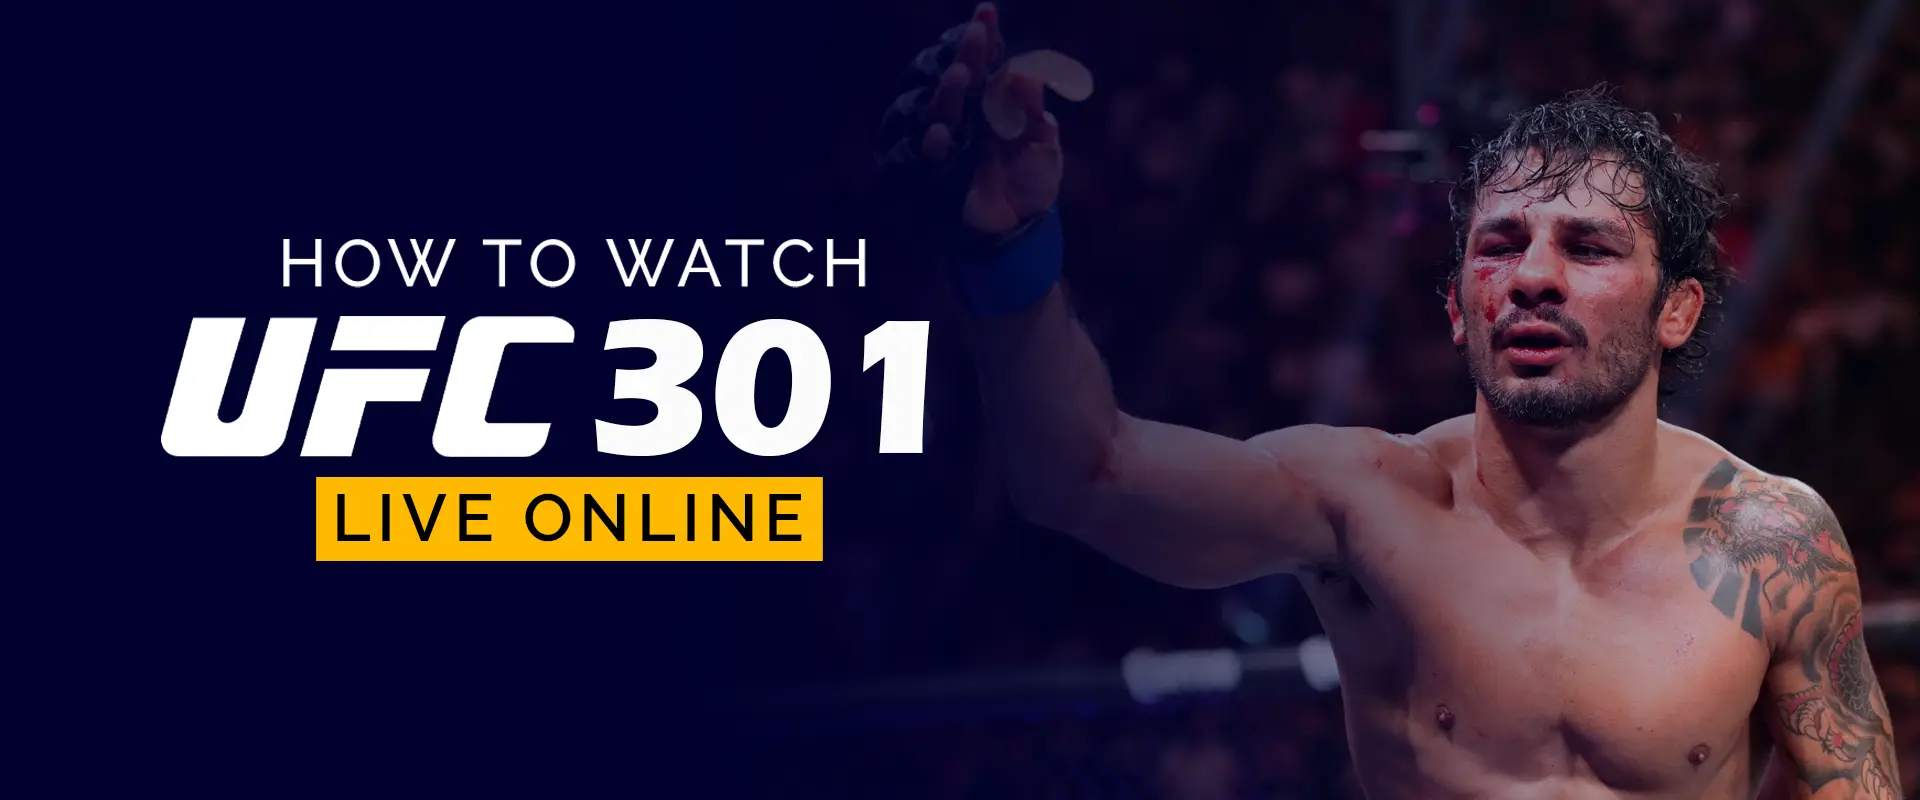 How to Watch UFC 301 Live Online 540